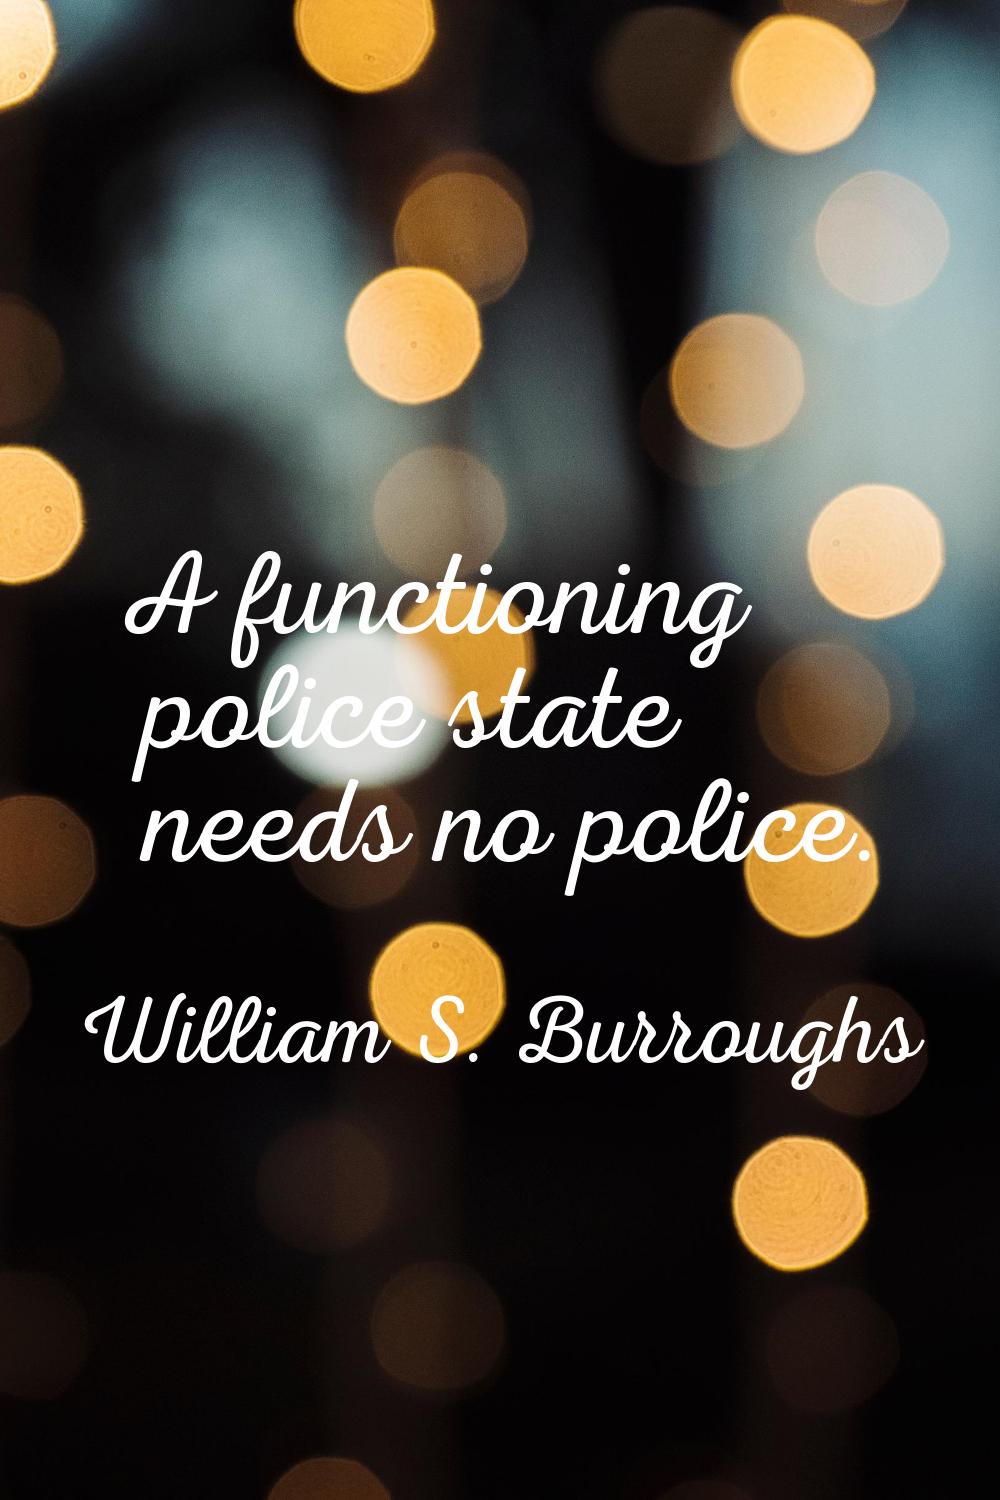 A functioning police state needs no police.